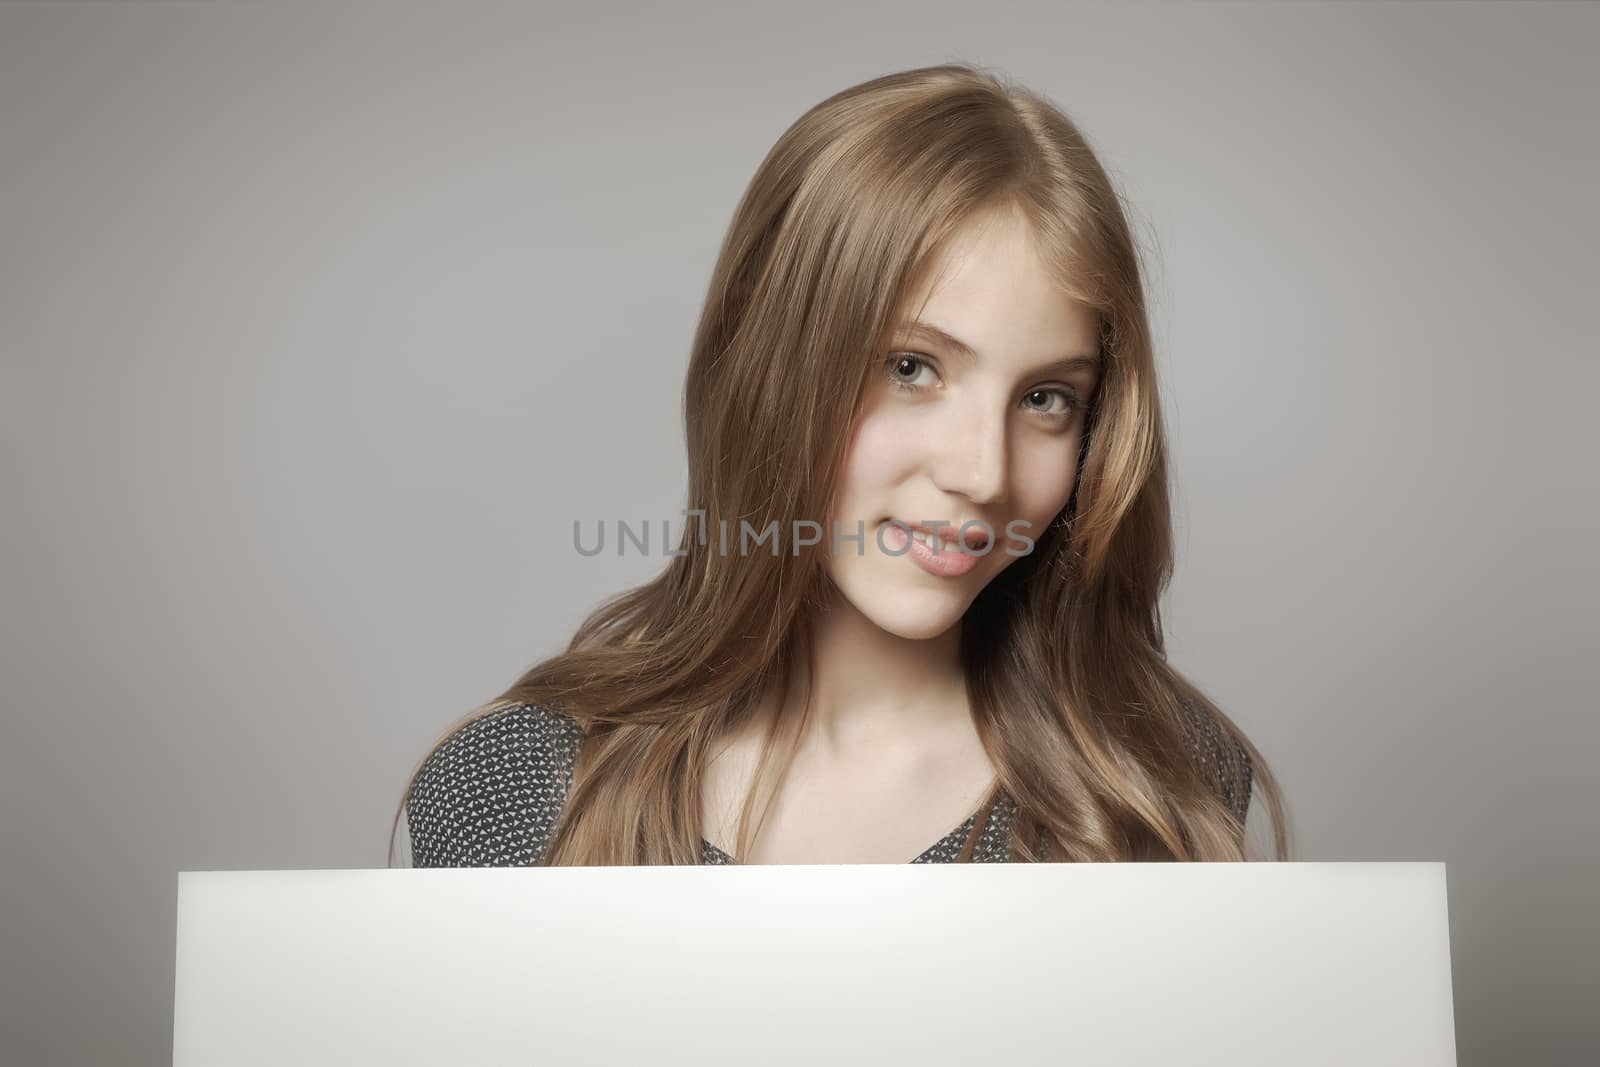 An image of a beautiful teenage girl holding a white board